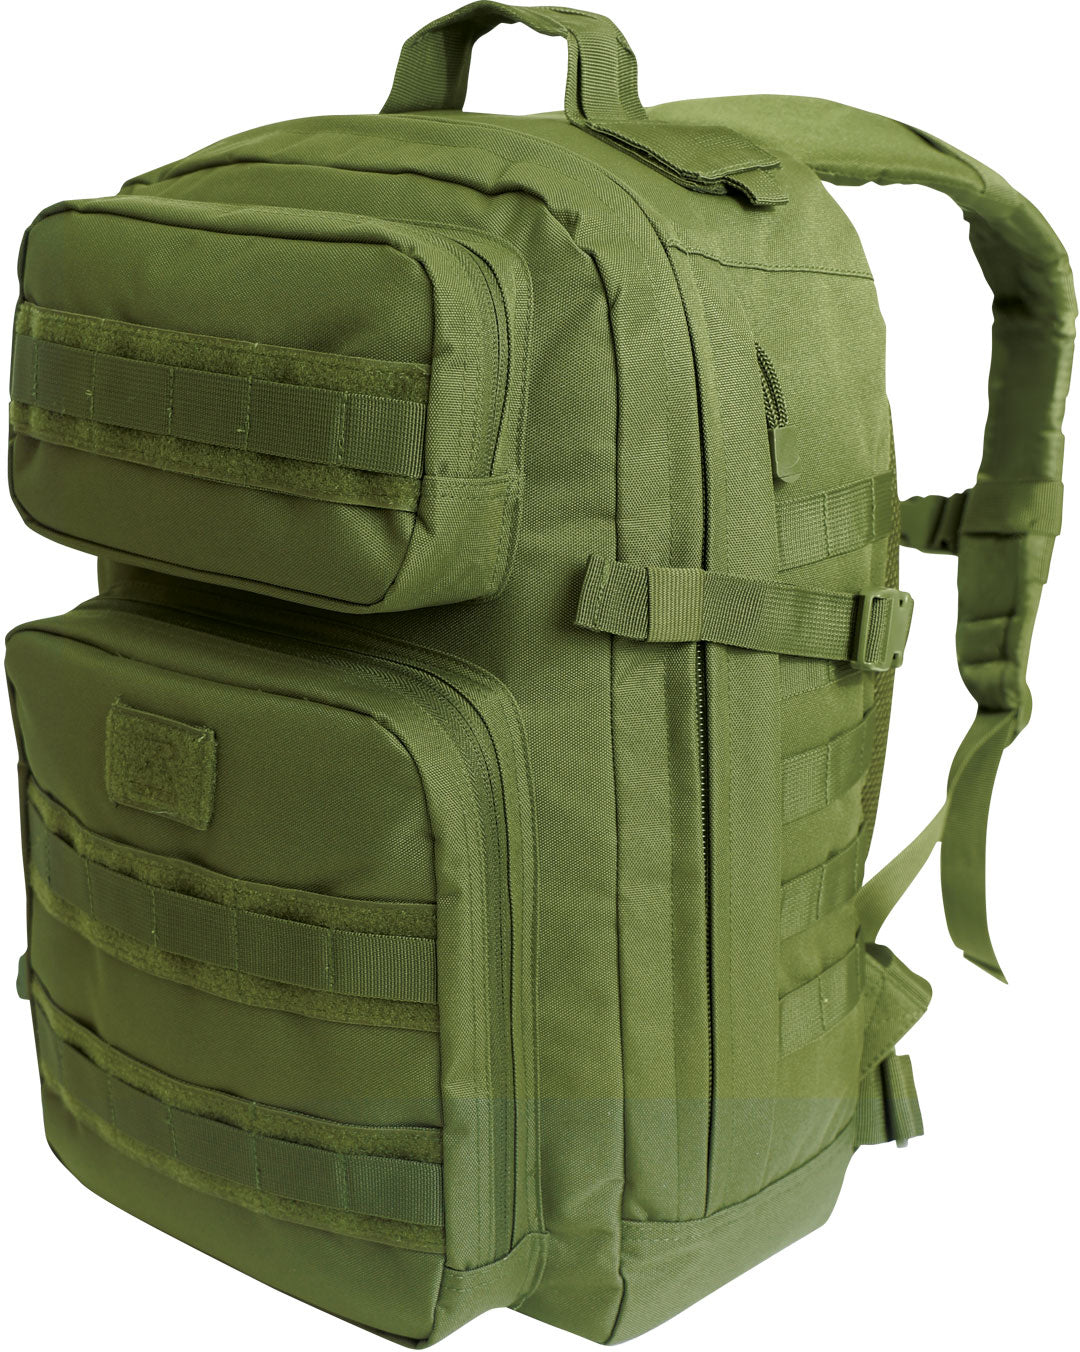 Olive Drab - Fast Mover Tactical Backpack